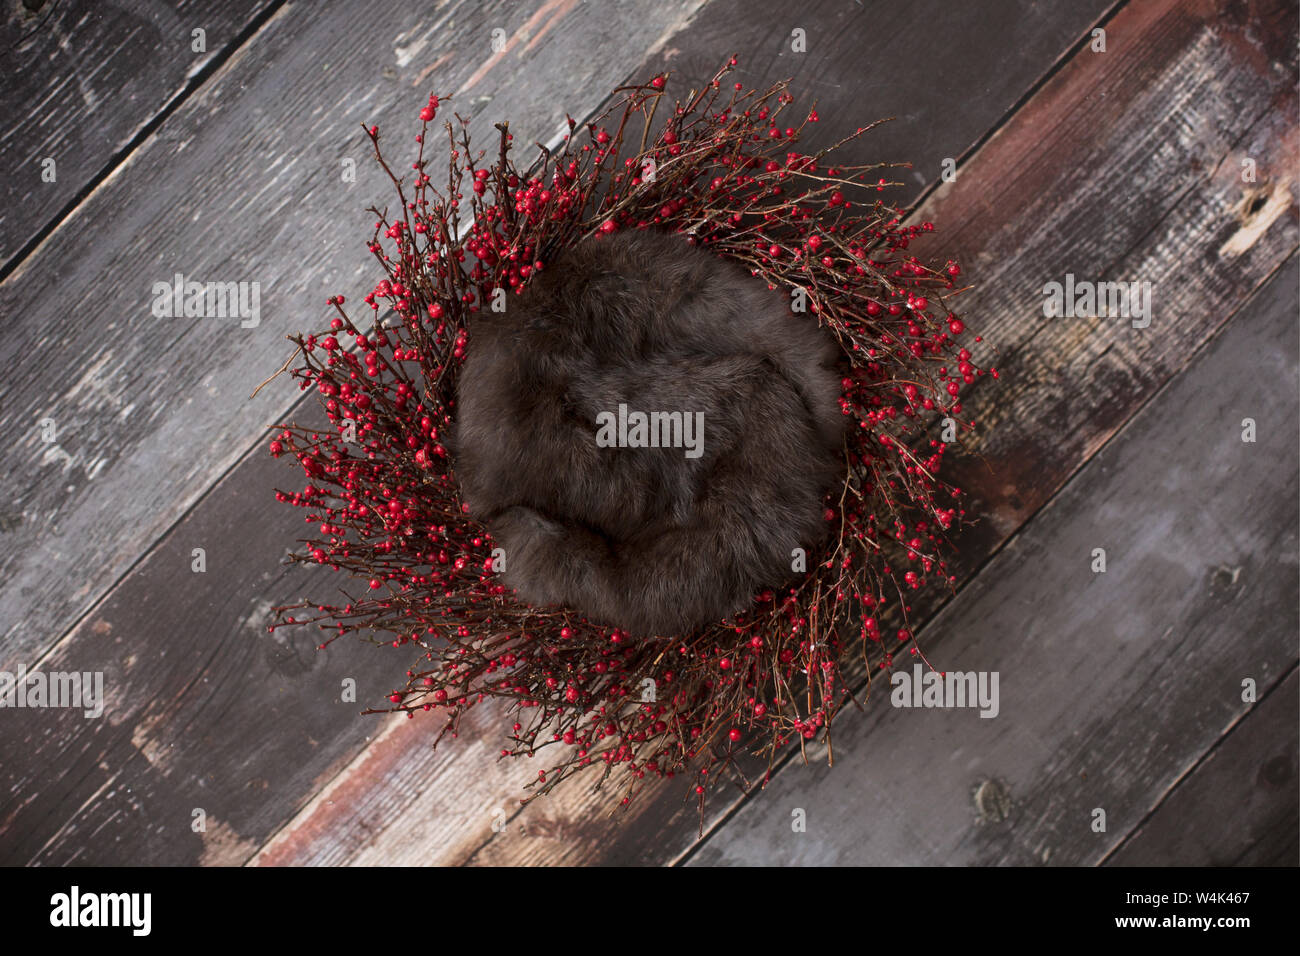 Newborn Digital Background Berry Wreath and Brown Fur on Distressed Wood Stock Photo